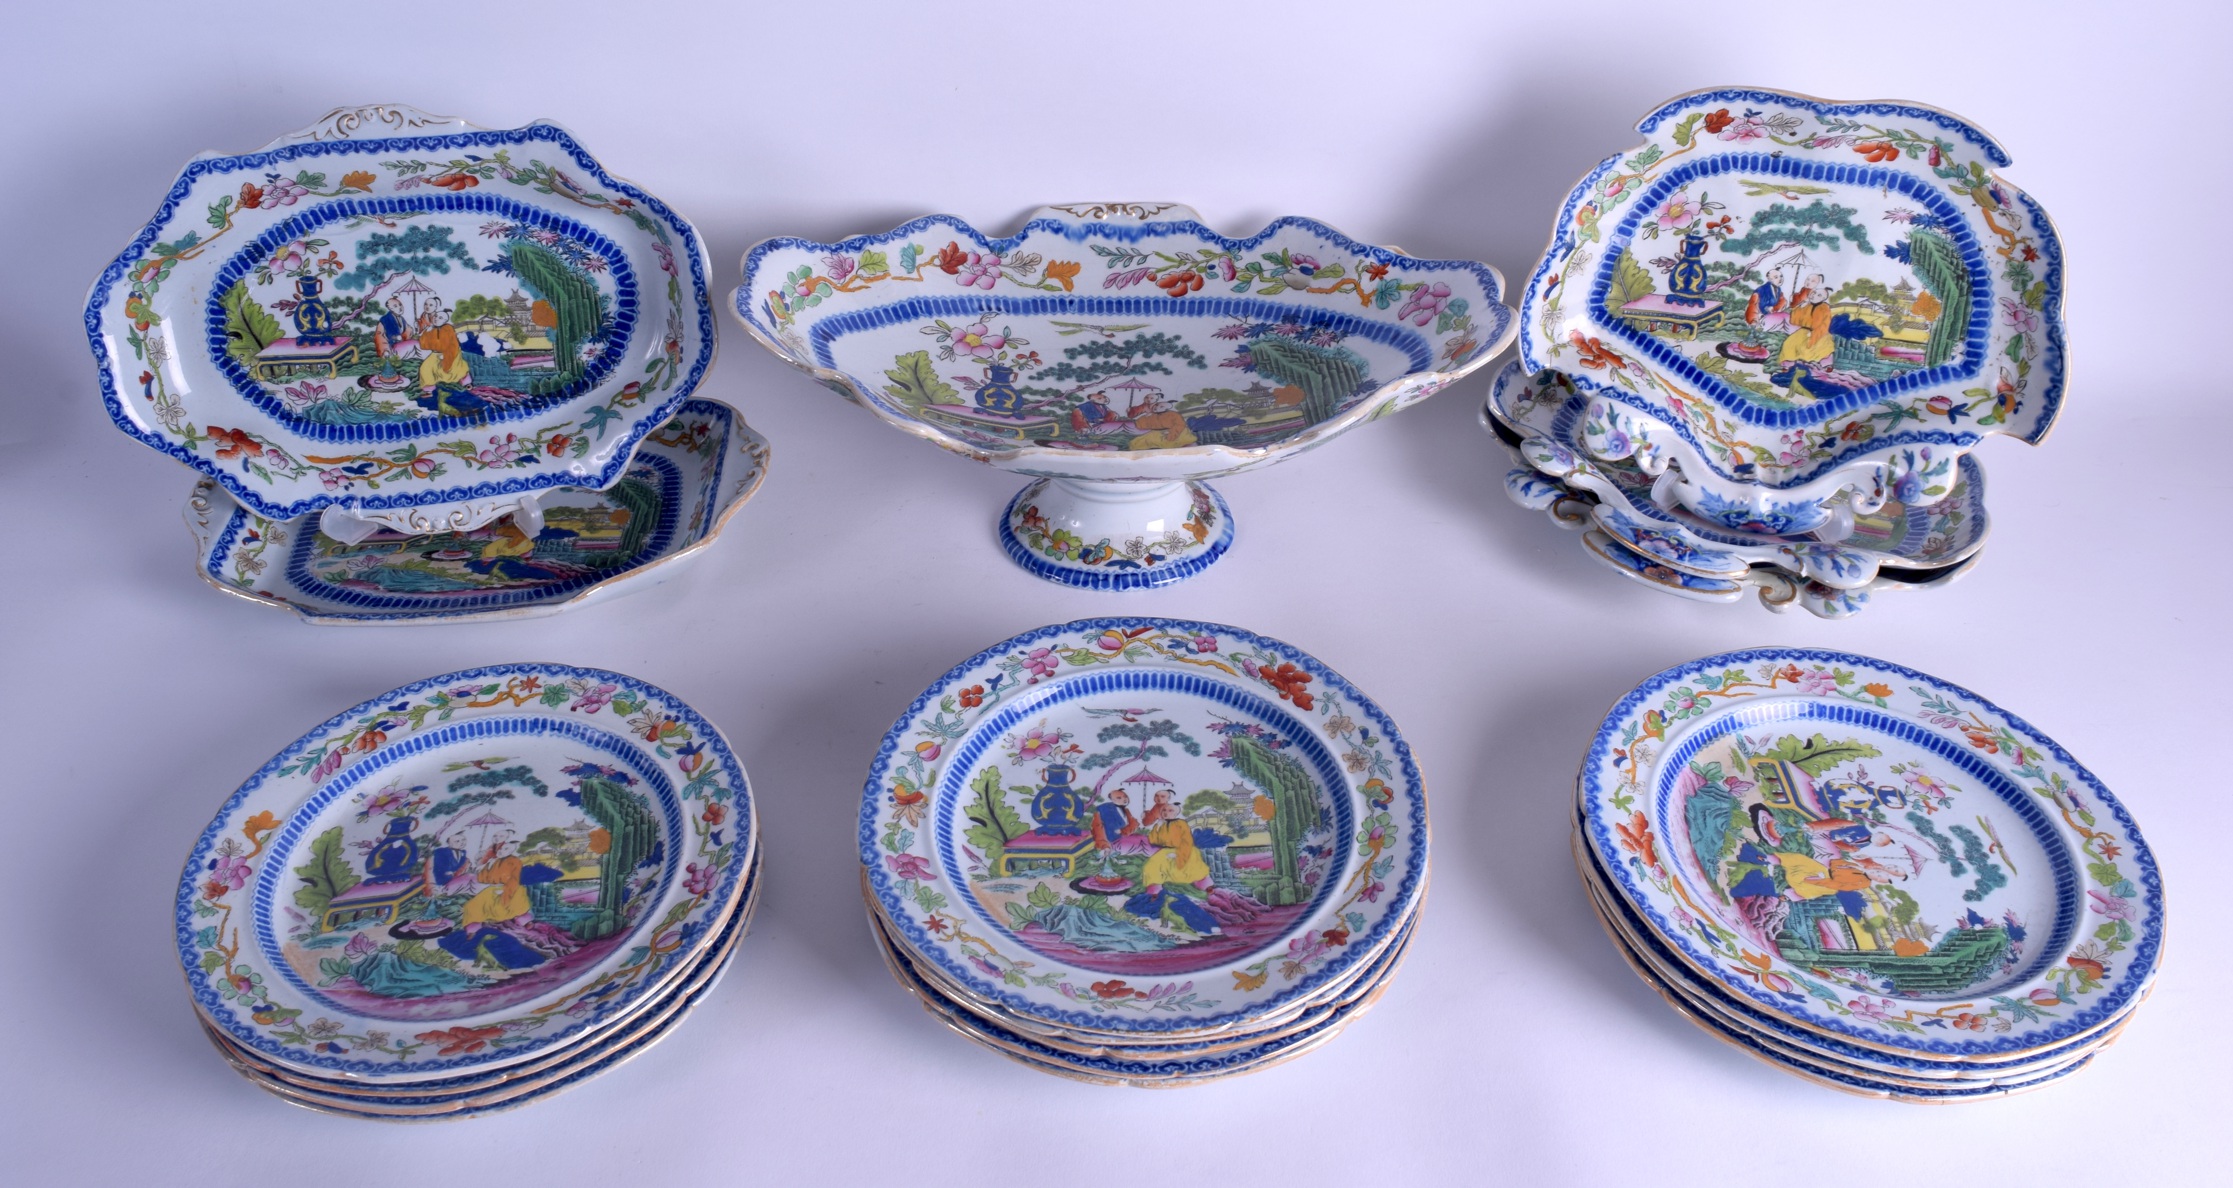 AN EARLY 19TH CENTURY MASONS IRONSTONE SERVICE decorated with Oriental figures within landscapes.